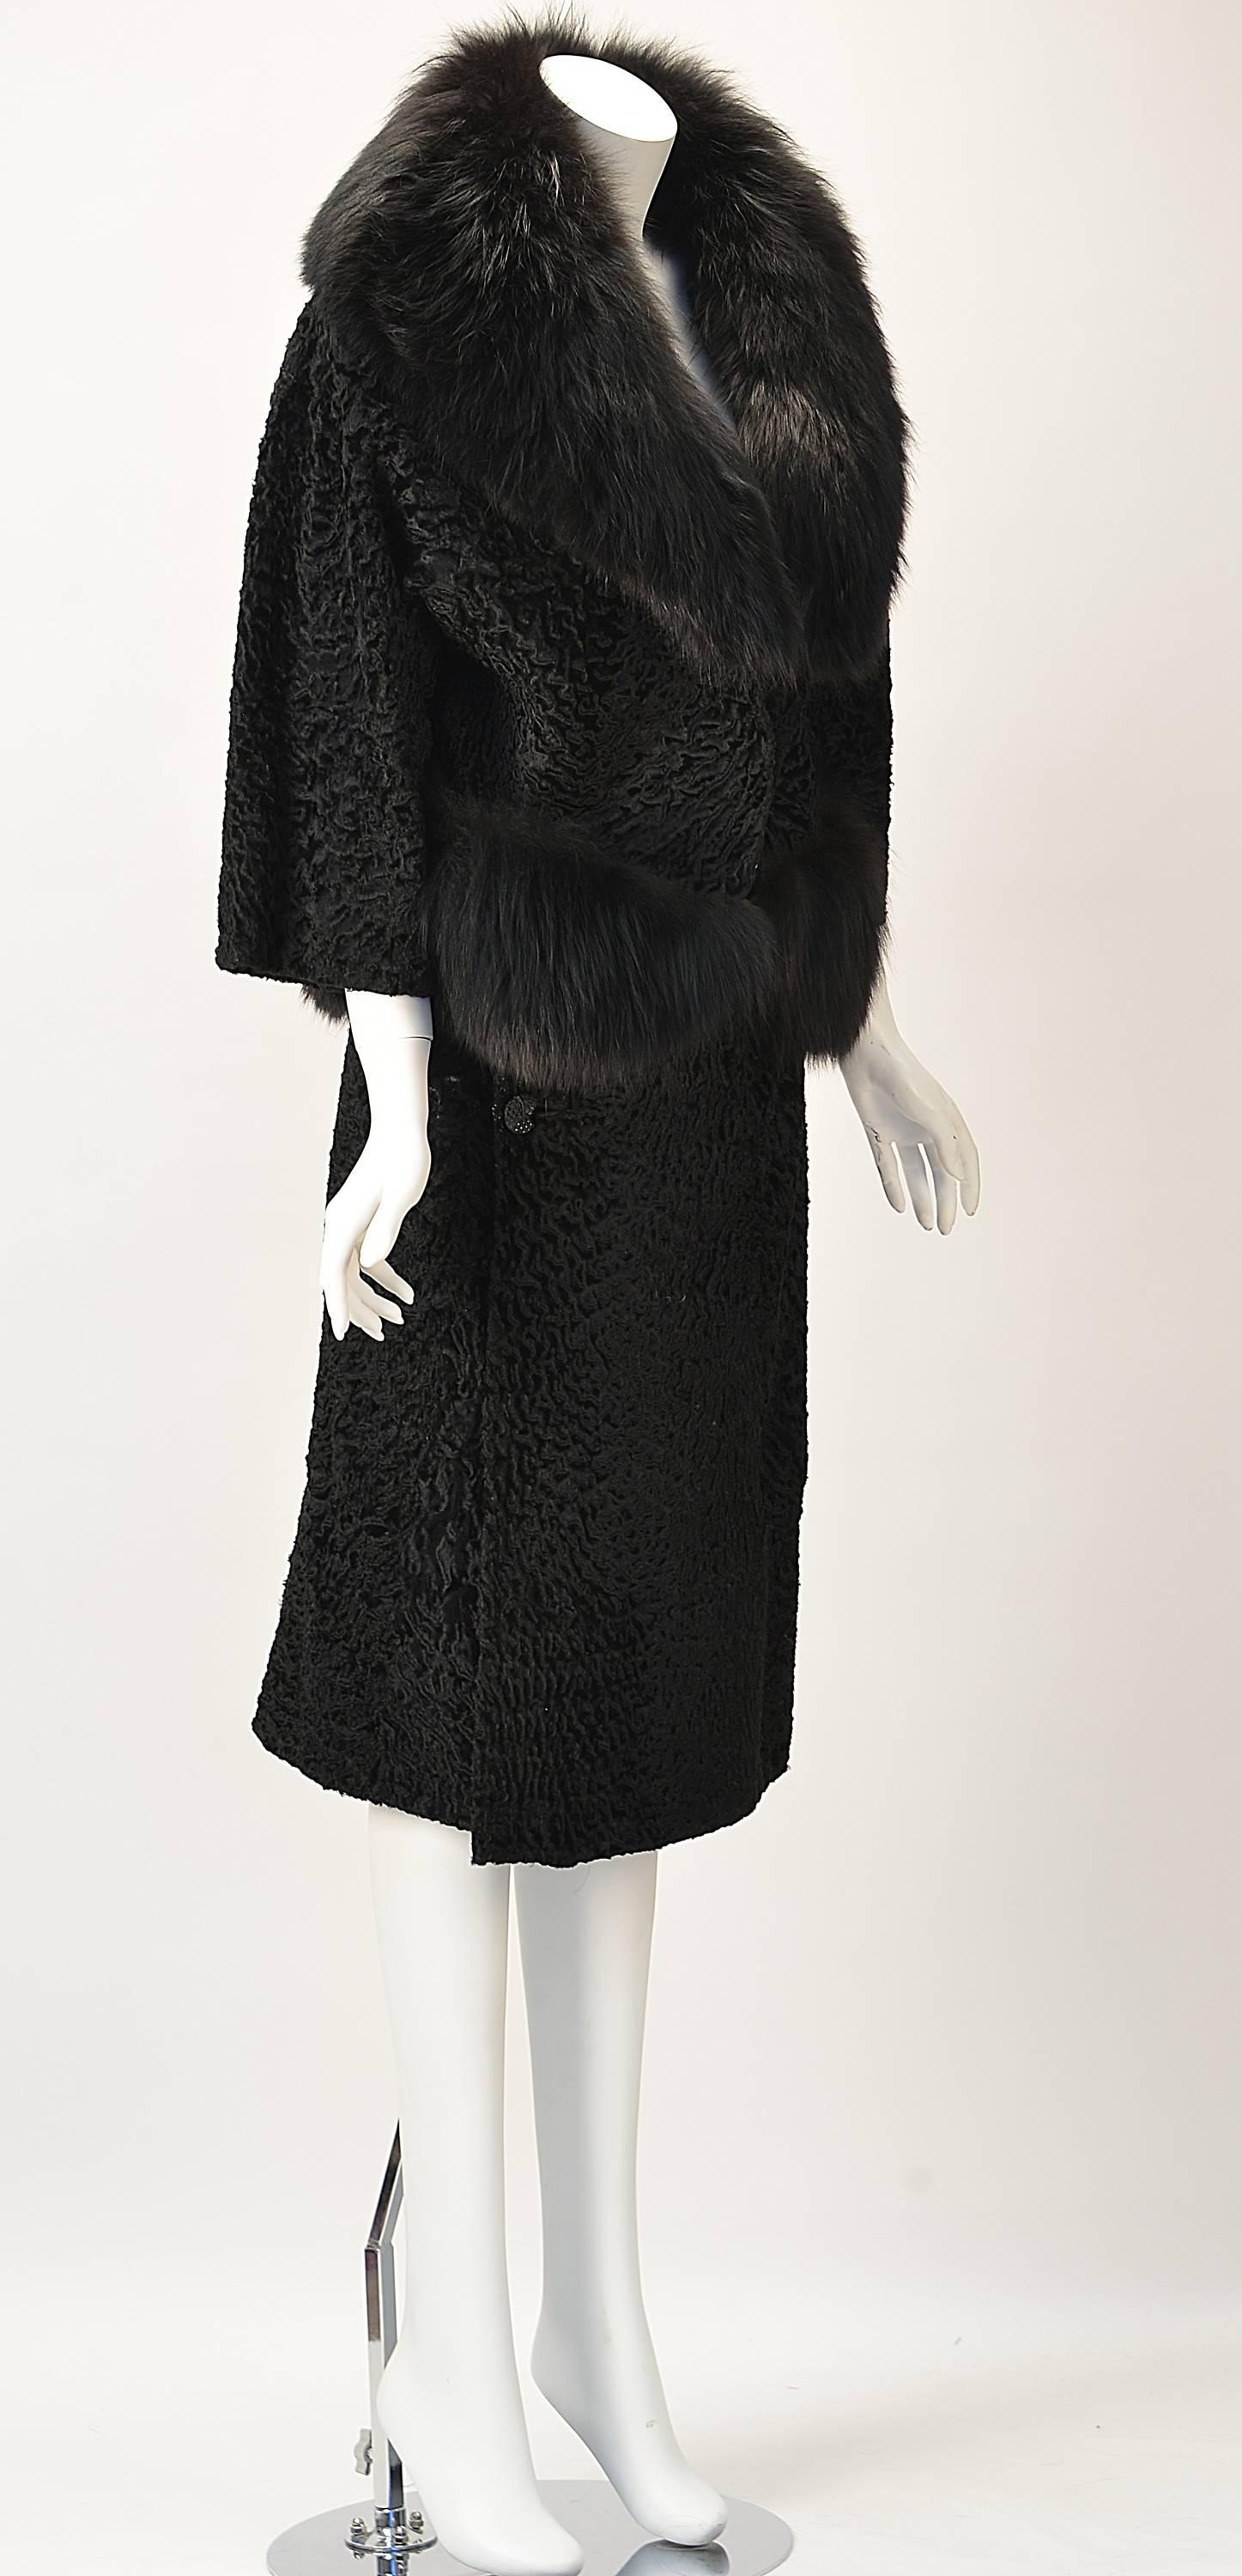 Absolutely Divine!

Martha Weathered Imported fabrics and owned a boutique in Chicago. This is one of her ensembles she had designed and made of beautiful black Persian lamb with large mink fur trim. The jacket has three quarter length sleeves and